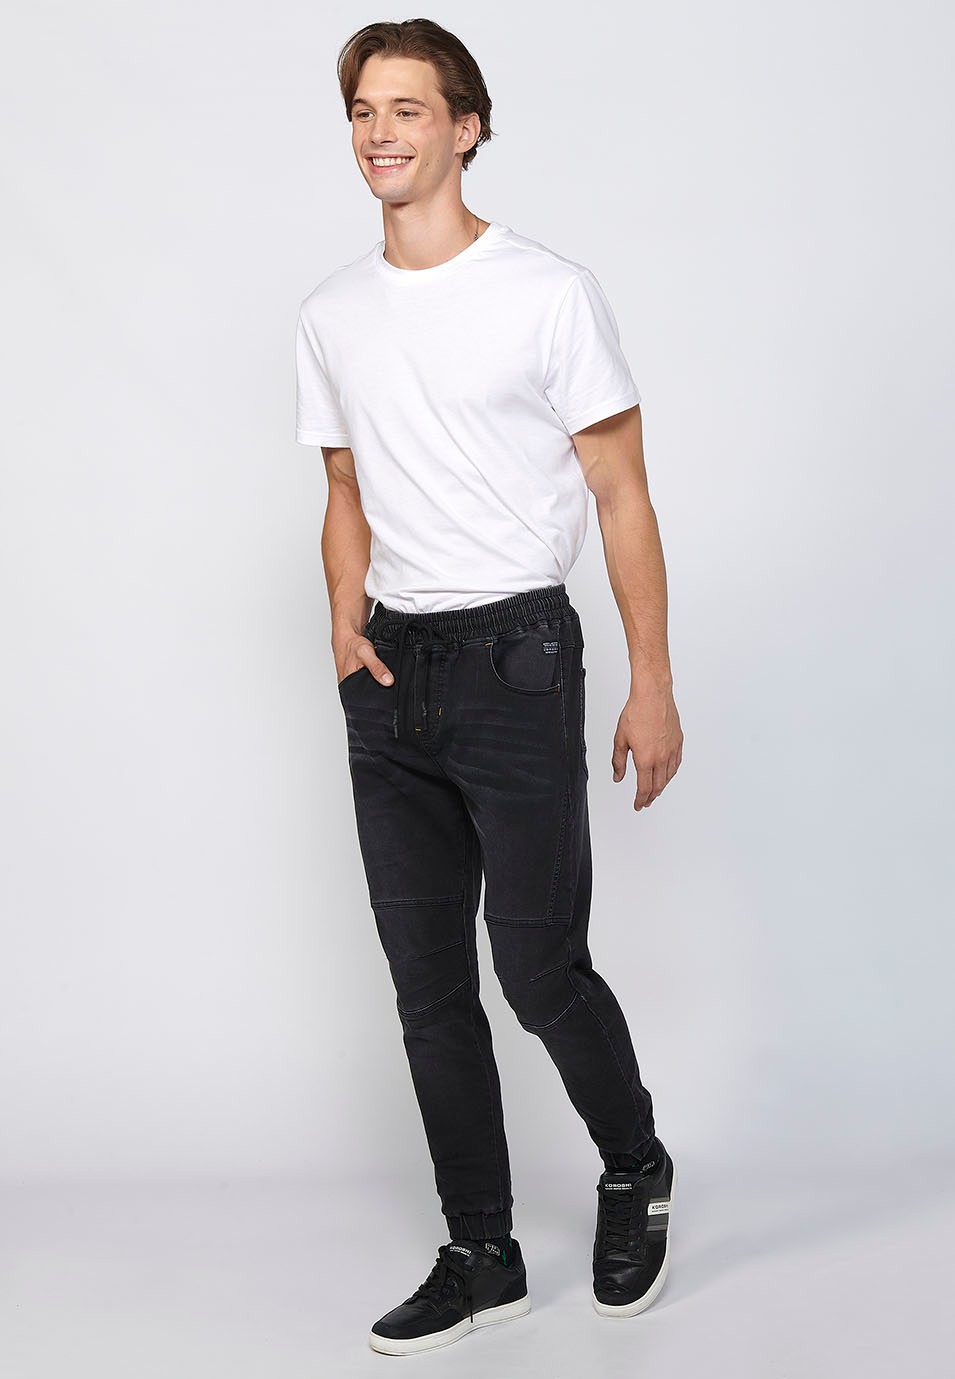 Long slim jogger pants fitted at the ankles with adjustable elastic waist and drawstring in Black for Men